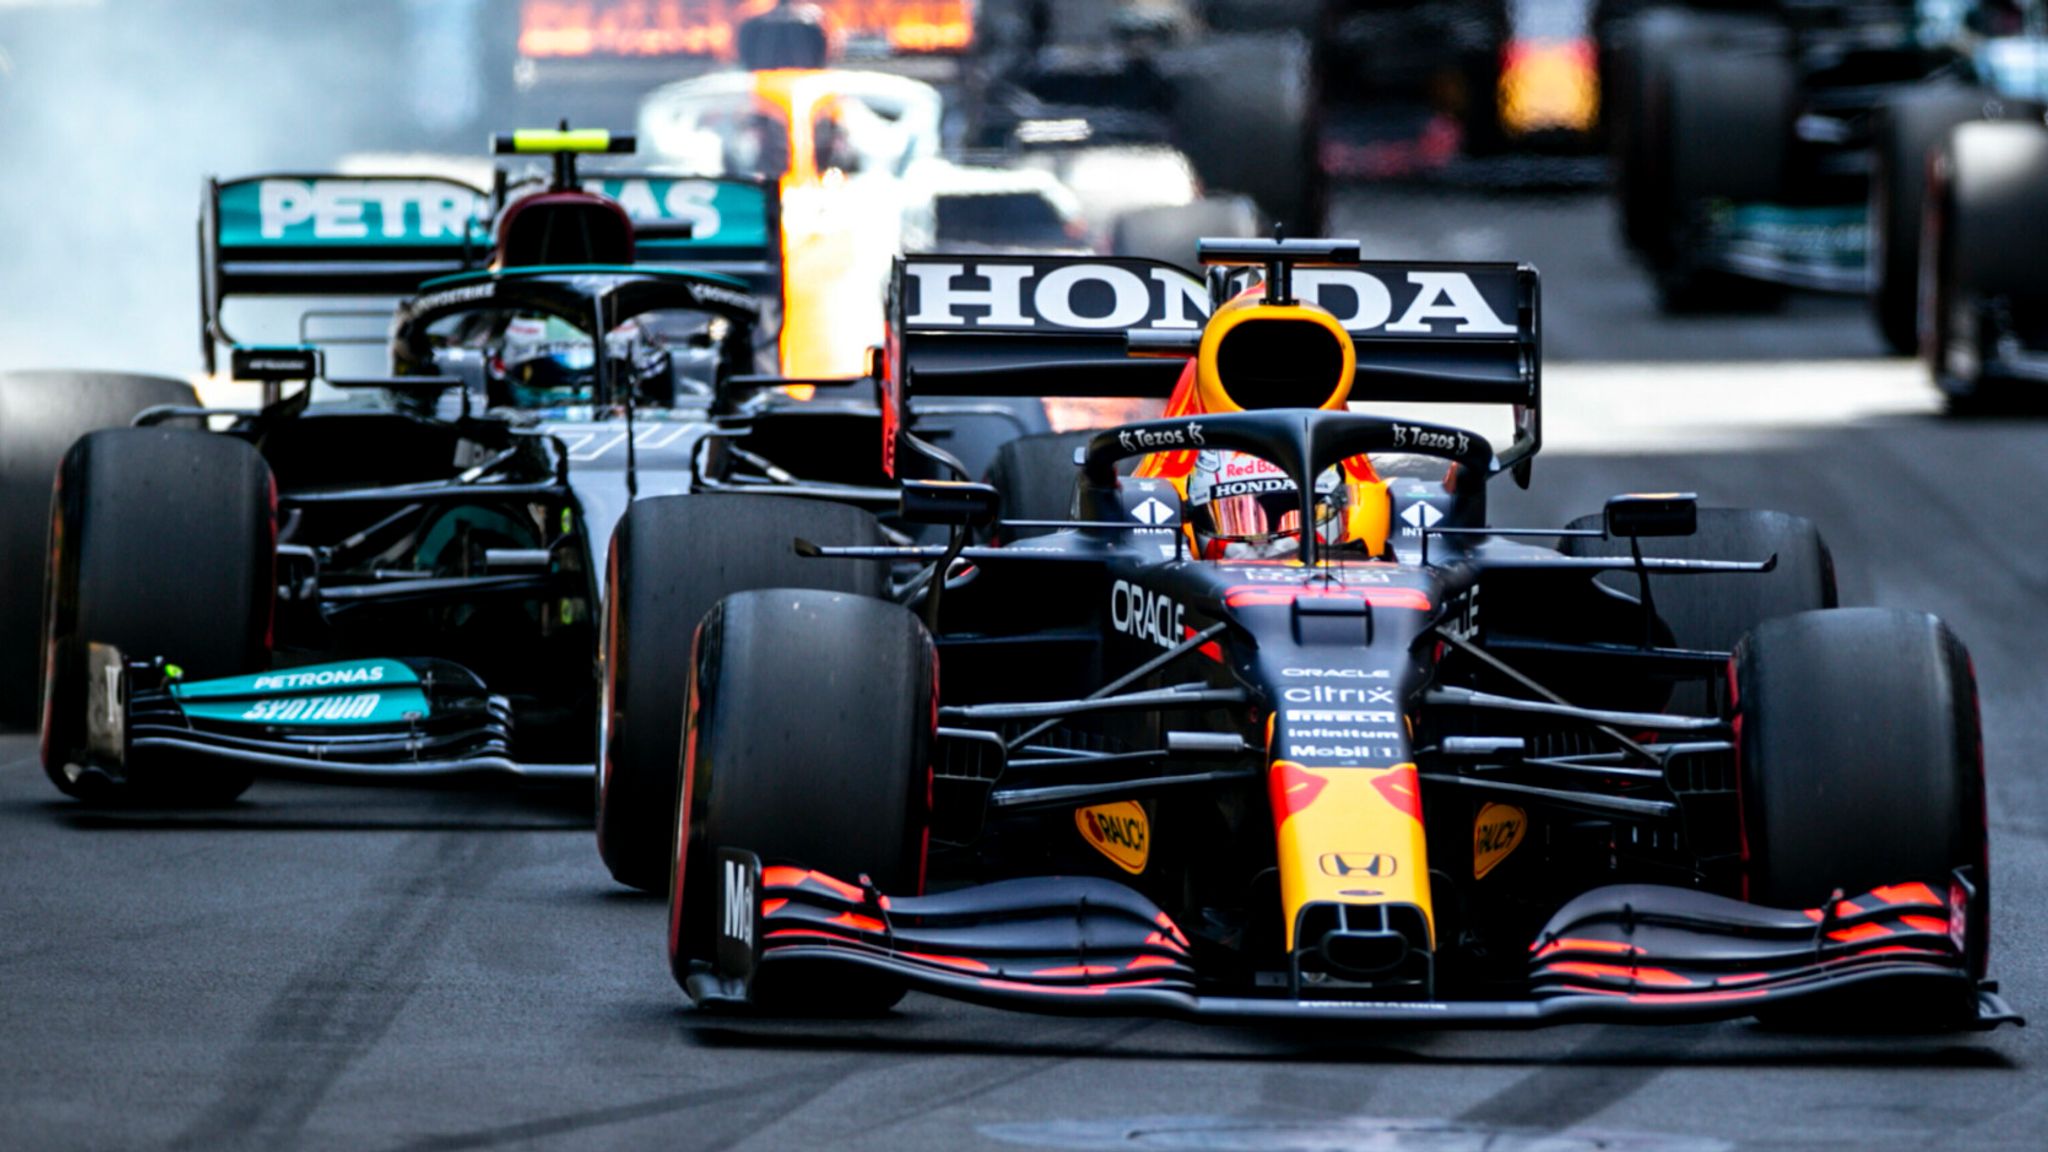 Flexi-wing package gives Red Bull a considerable advantage over Mercedes